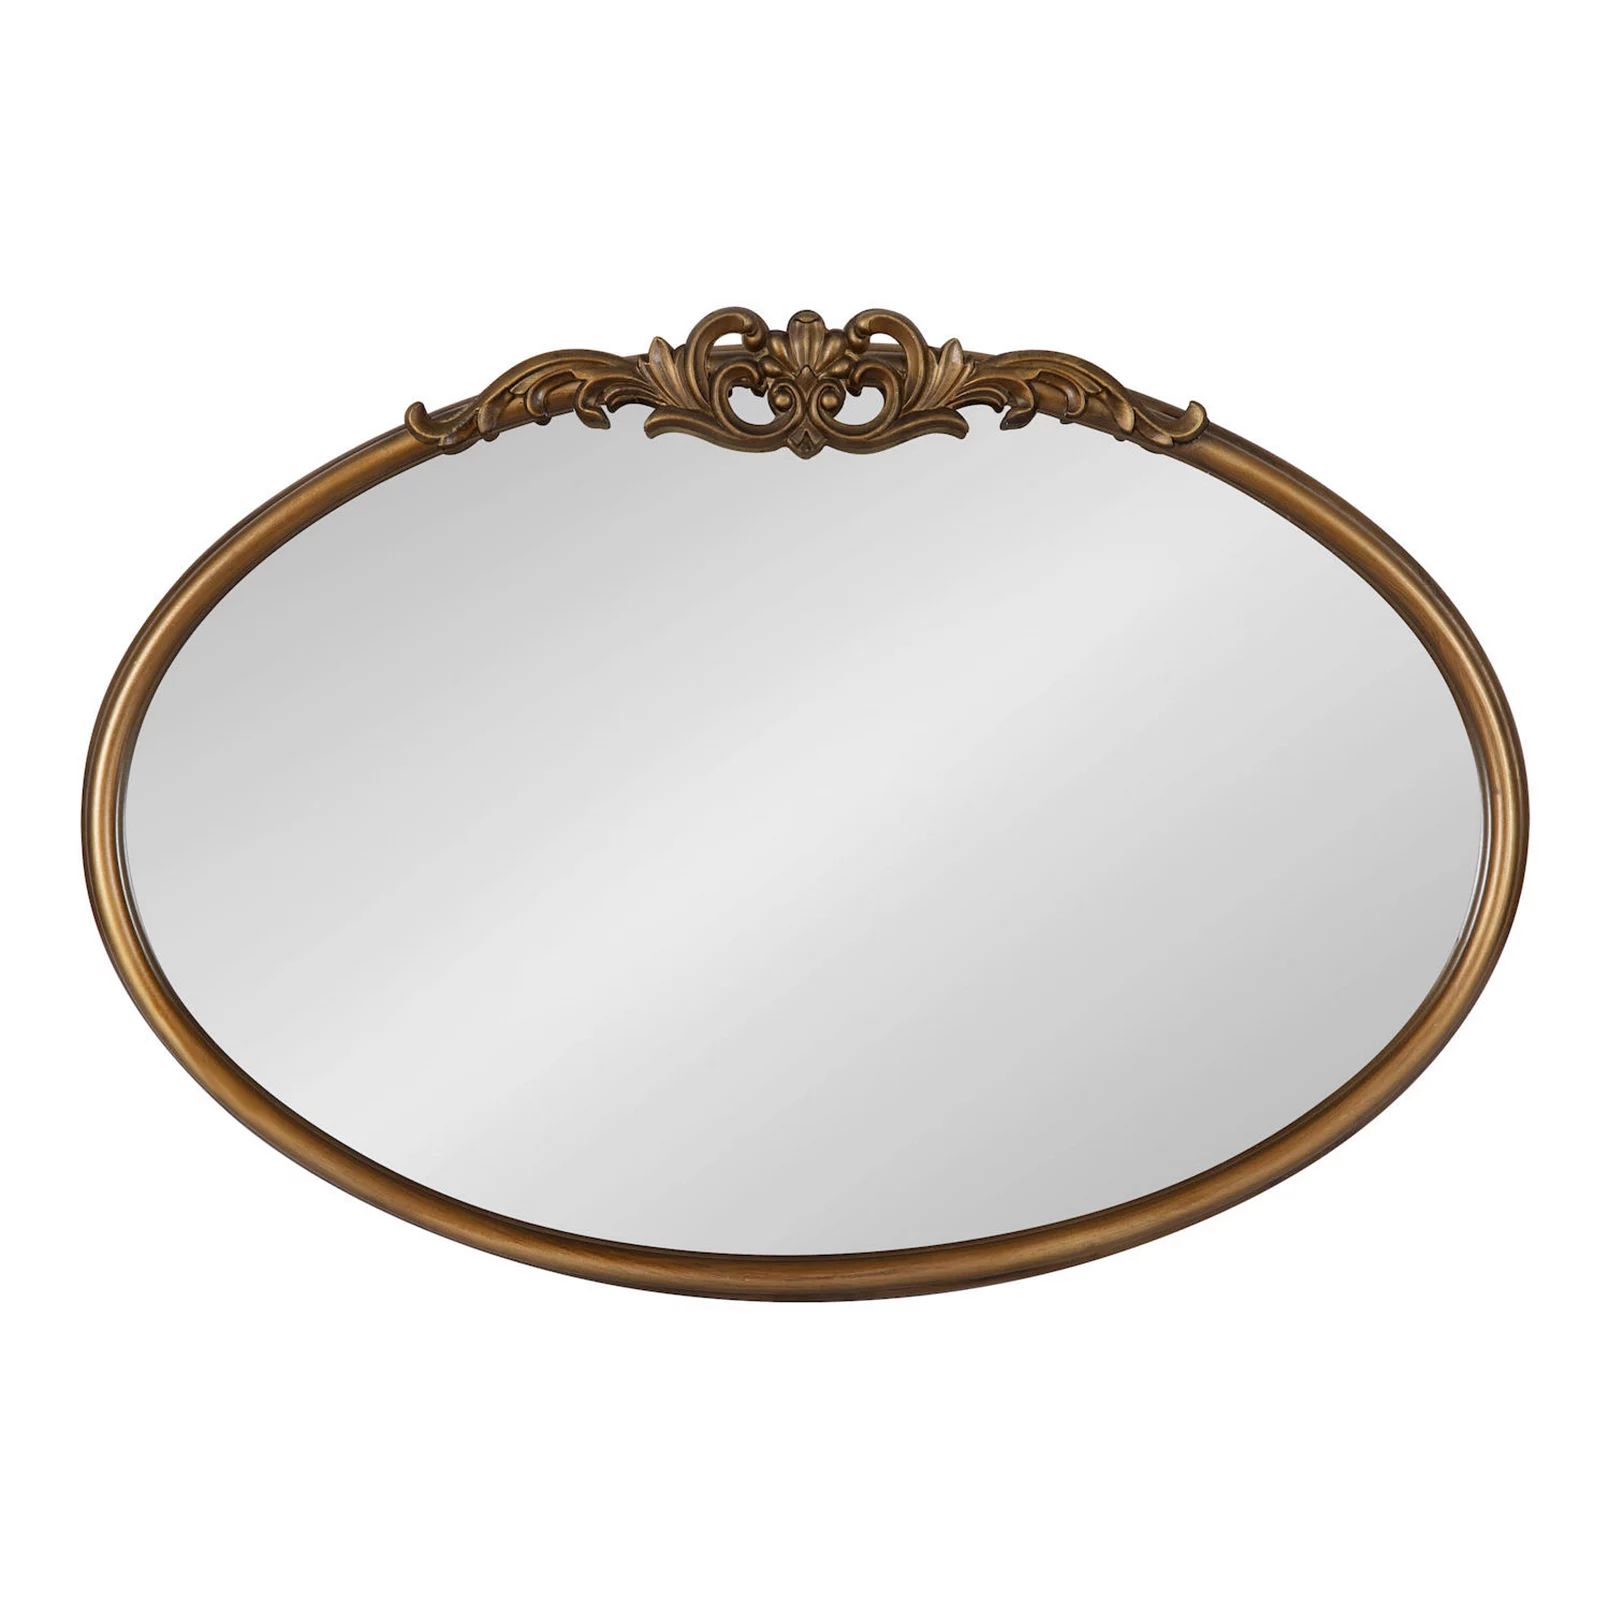 Kate and Laurel Arendahl Traditional Oval Ornate Wall Mirror | Kohl's